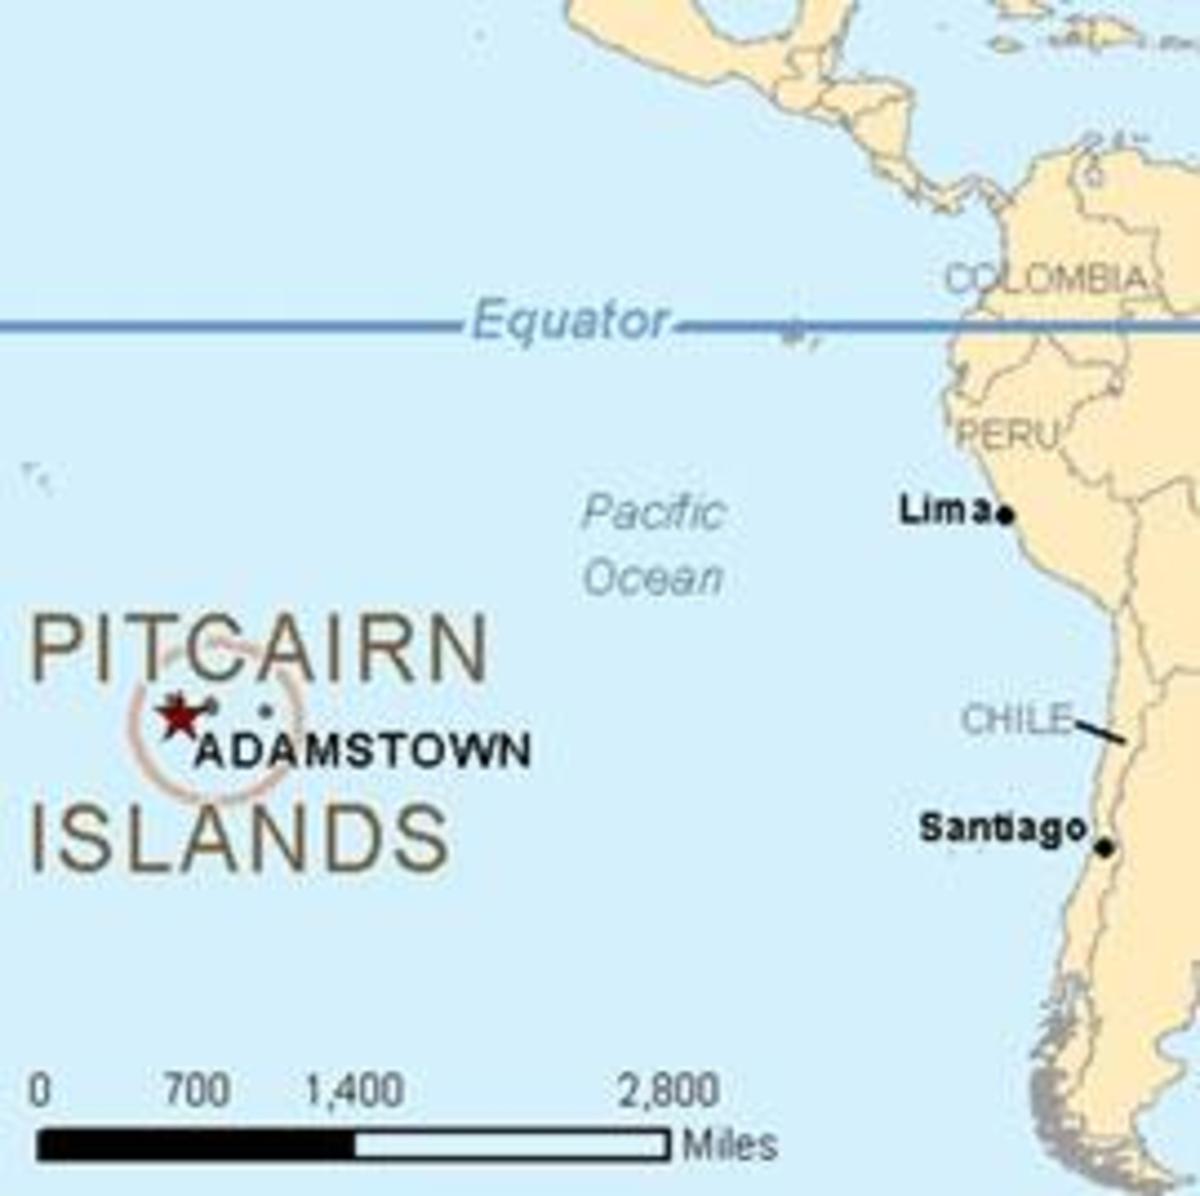 World’s Population – World’s Population by Country – and Pitcairn Islands of 67 People